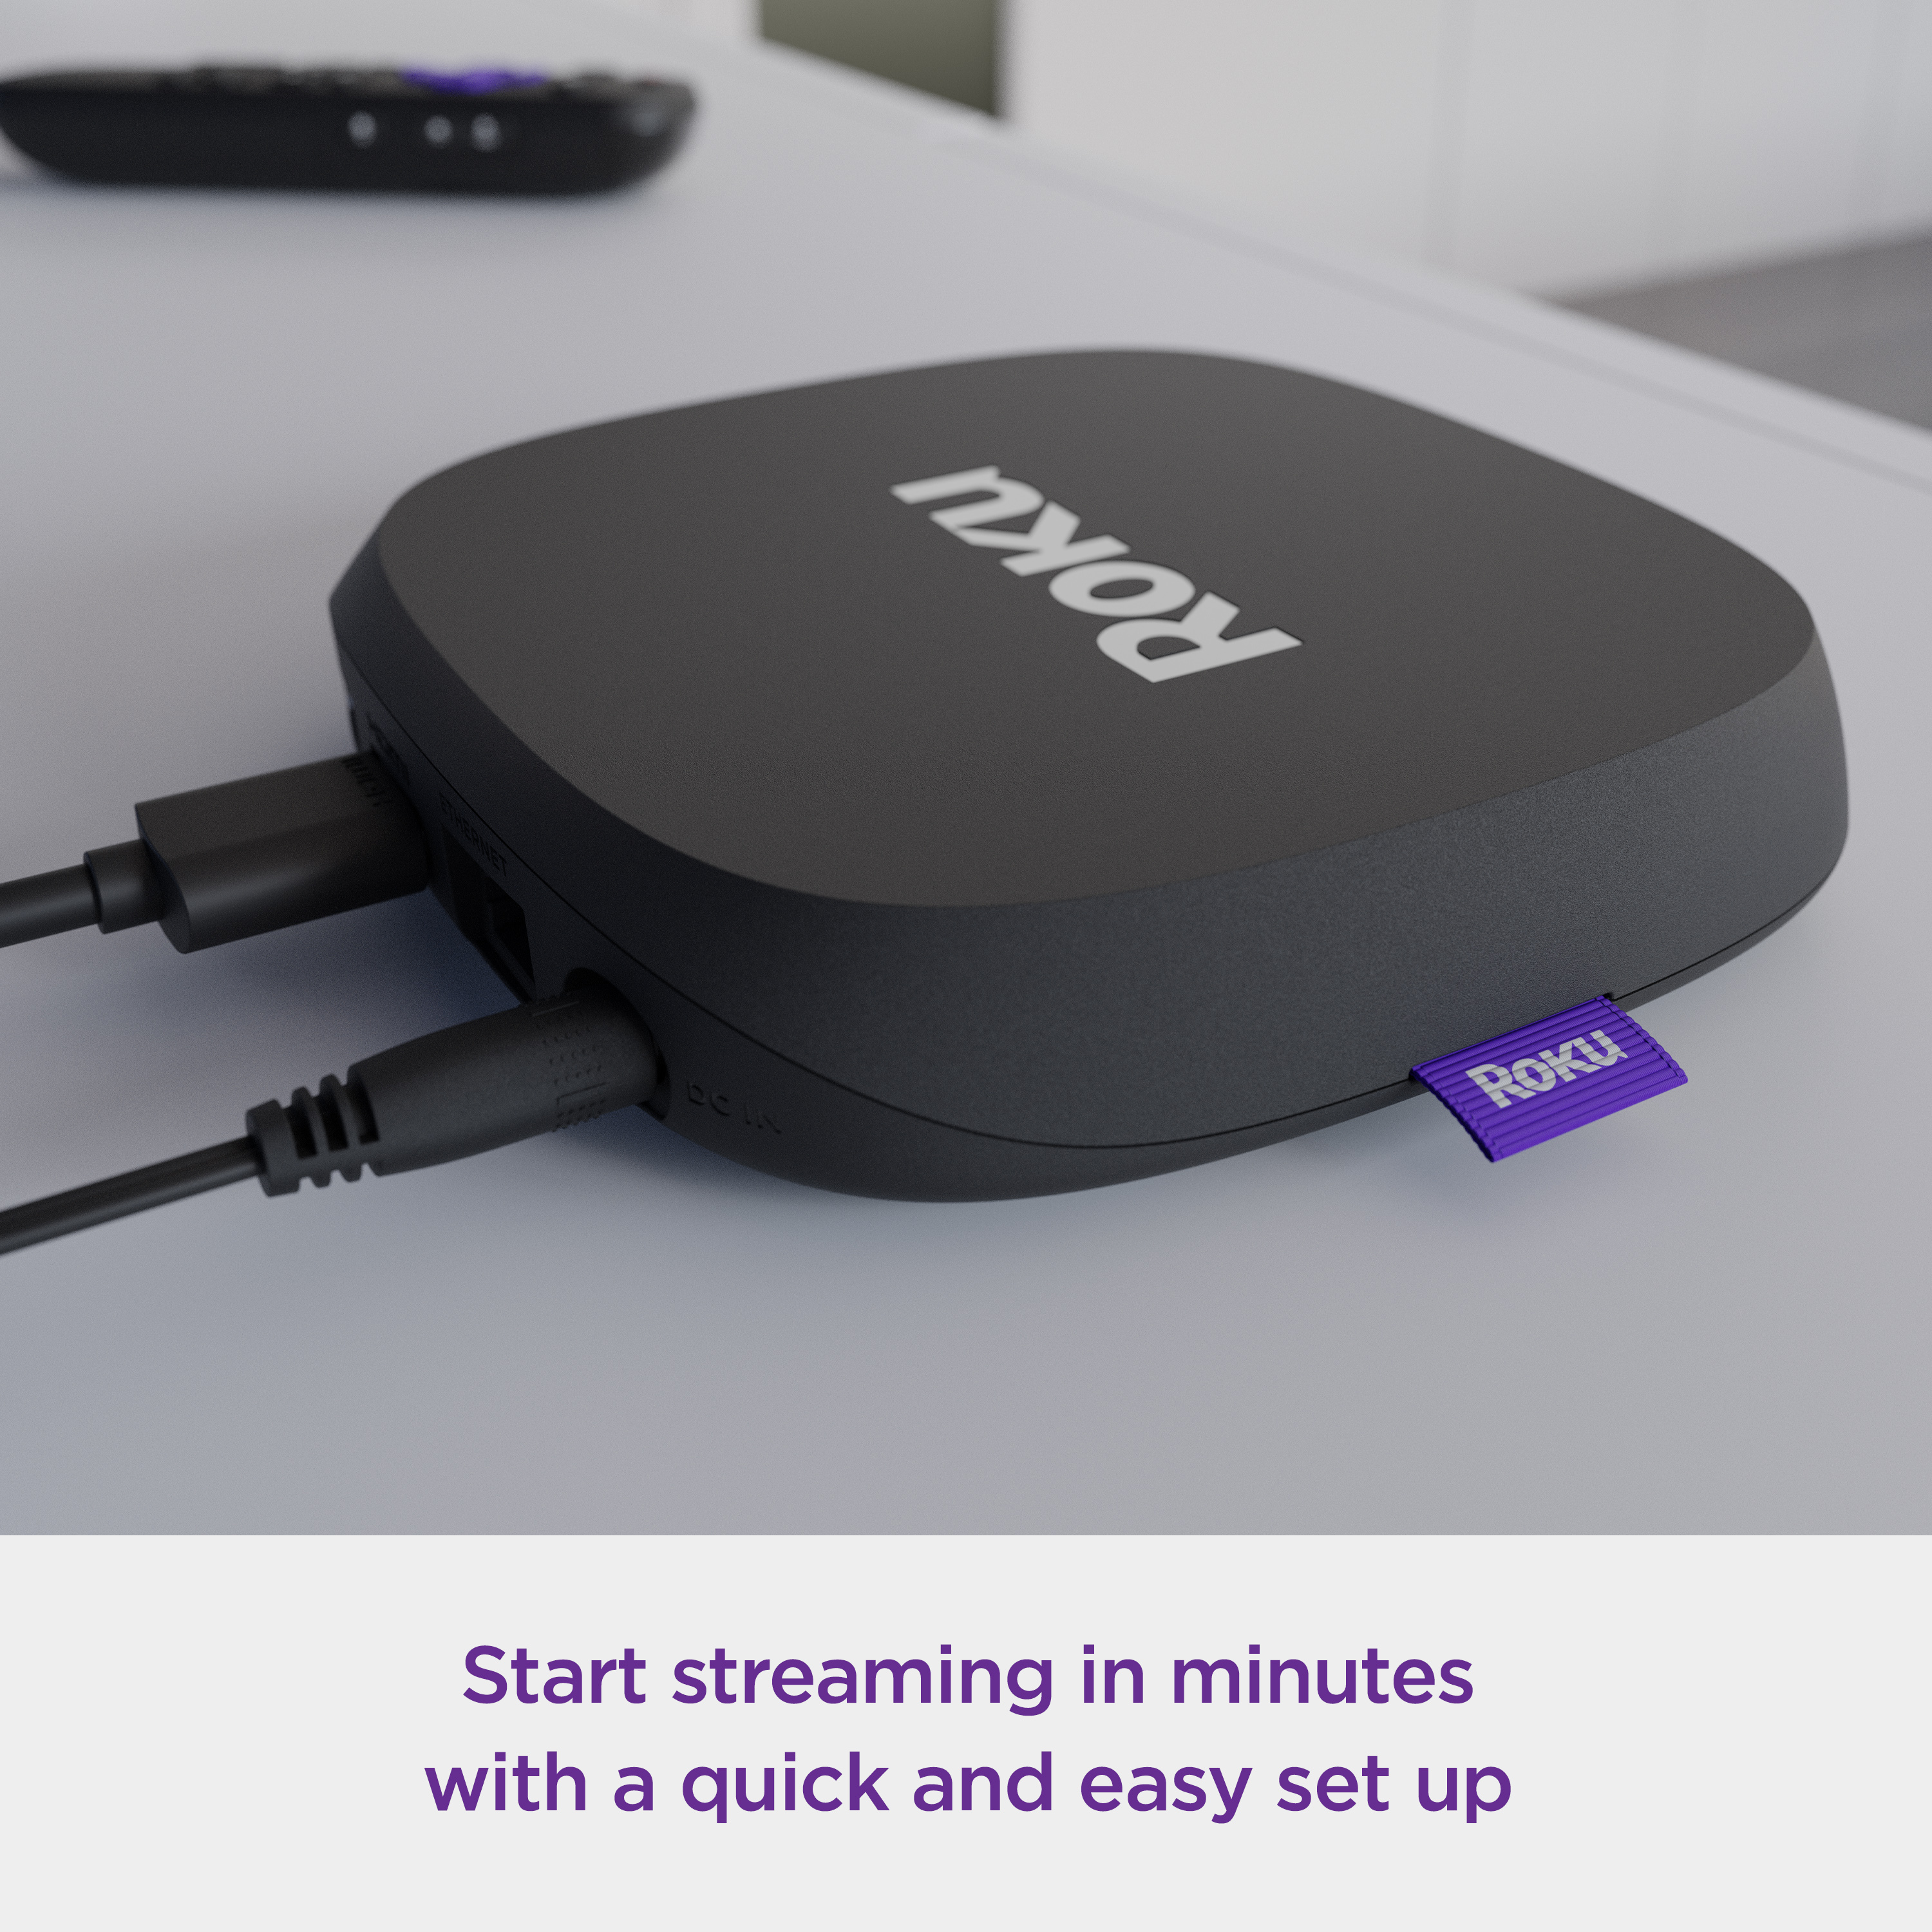 Roku Ultra LT Streaming Device 4K/HDR/Dolby Vision/Dual-Band Wi-Fi® with Roku Voice Remote and HDMI Cable - image 11 of 11